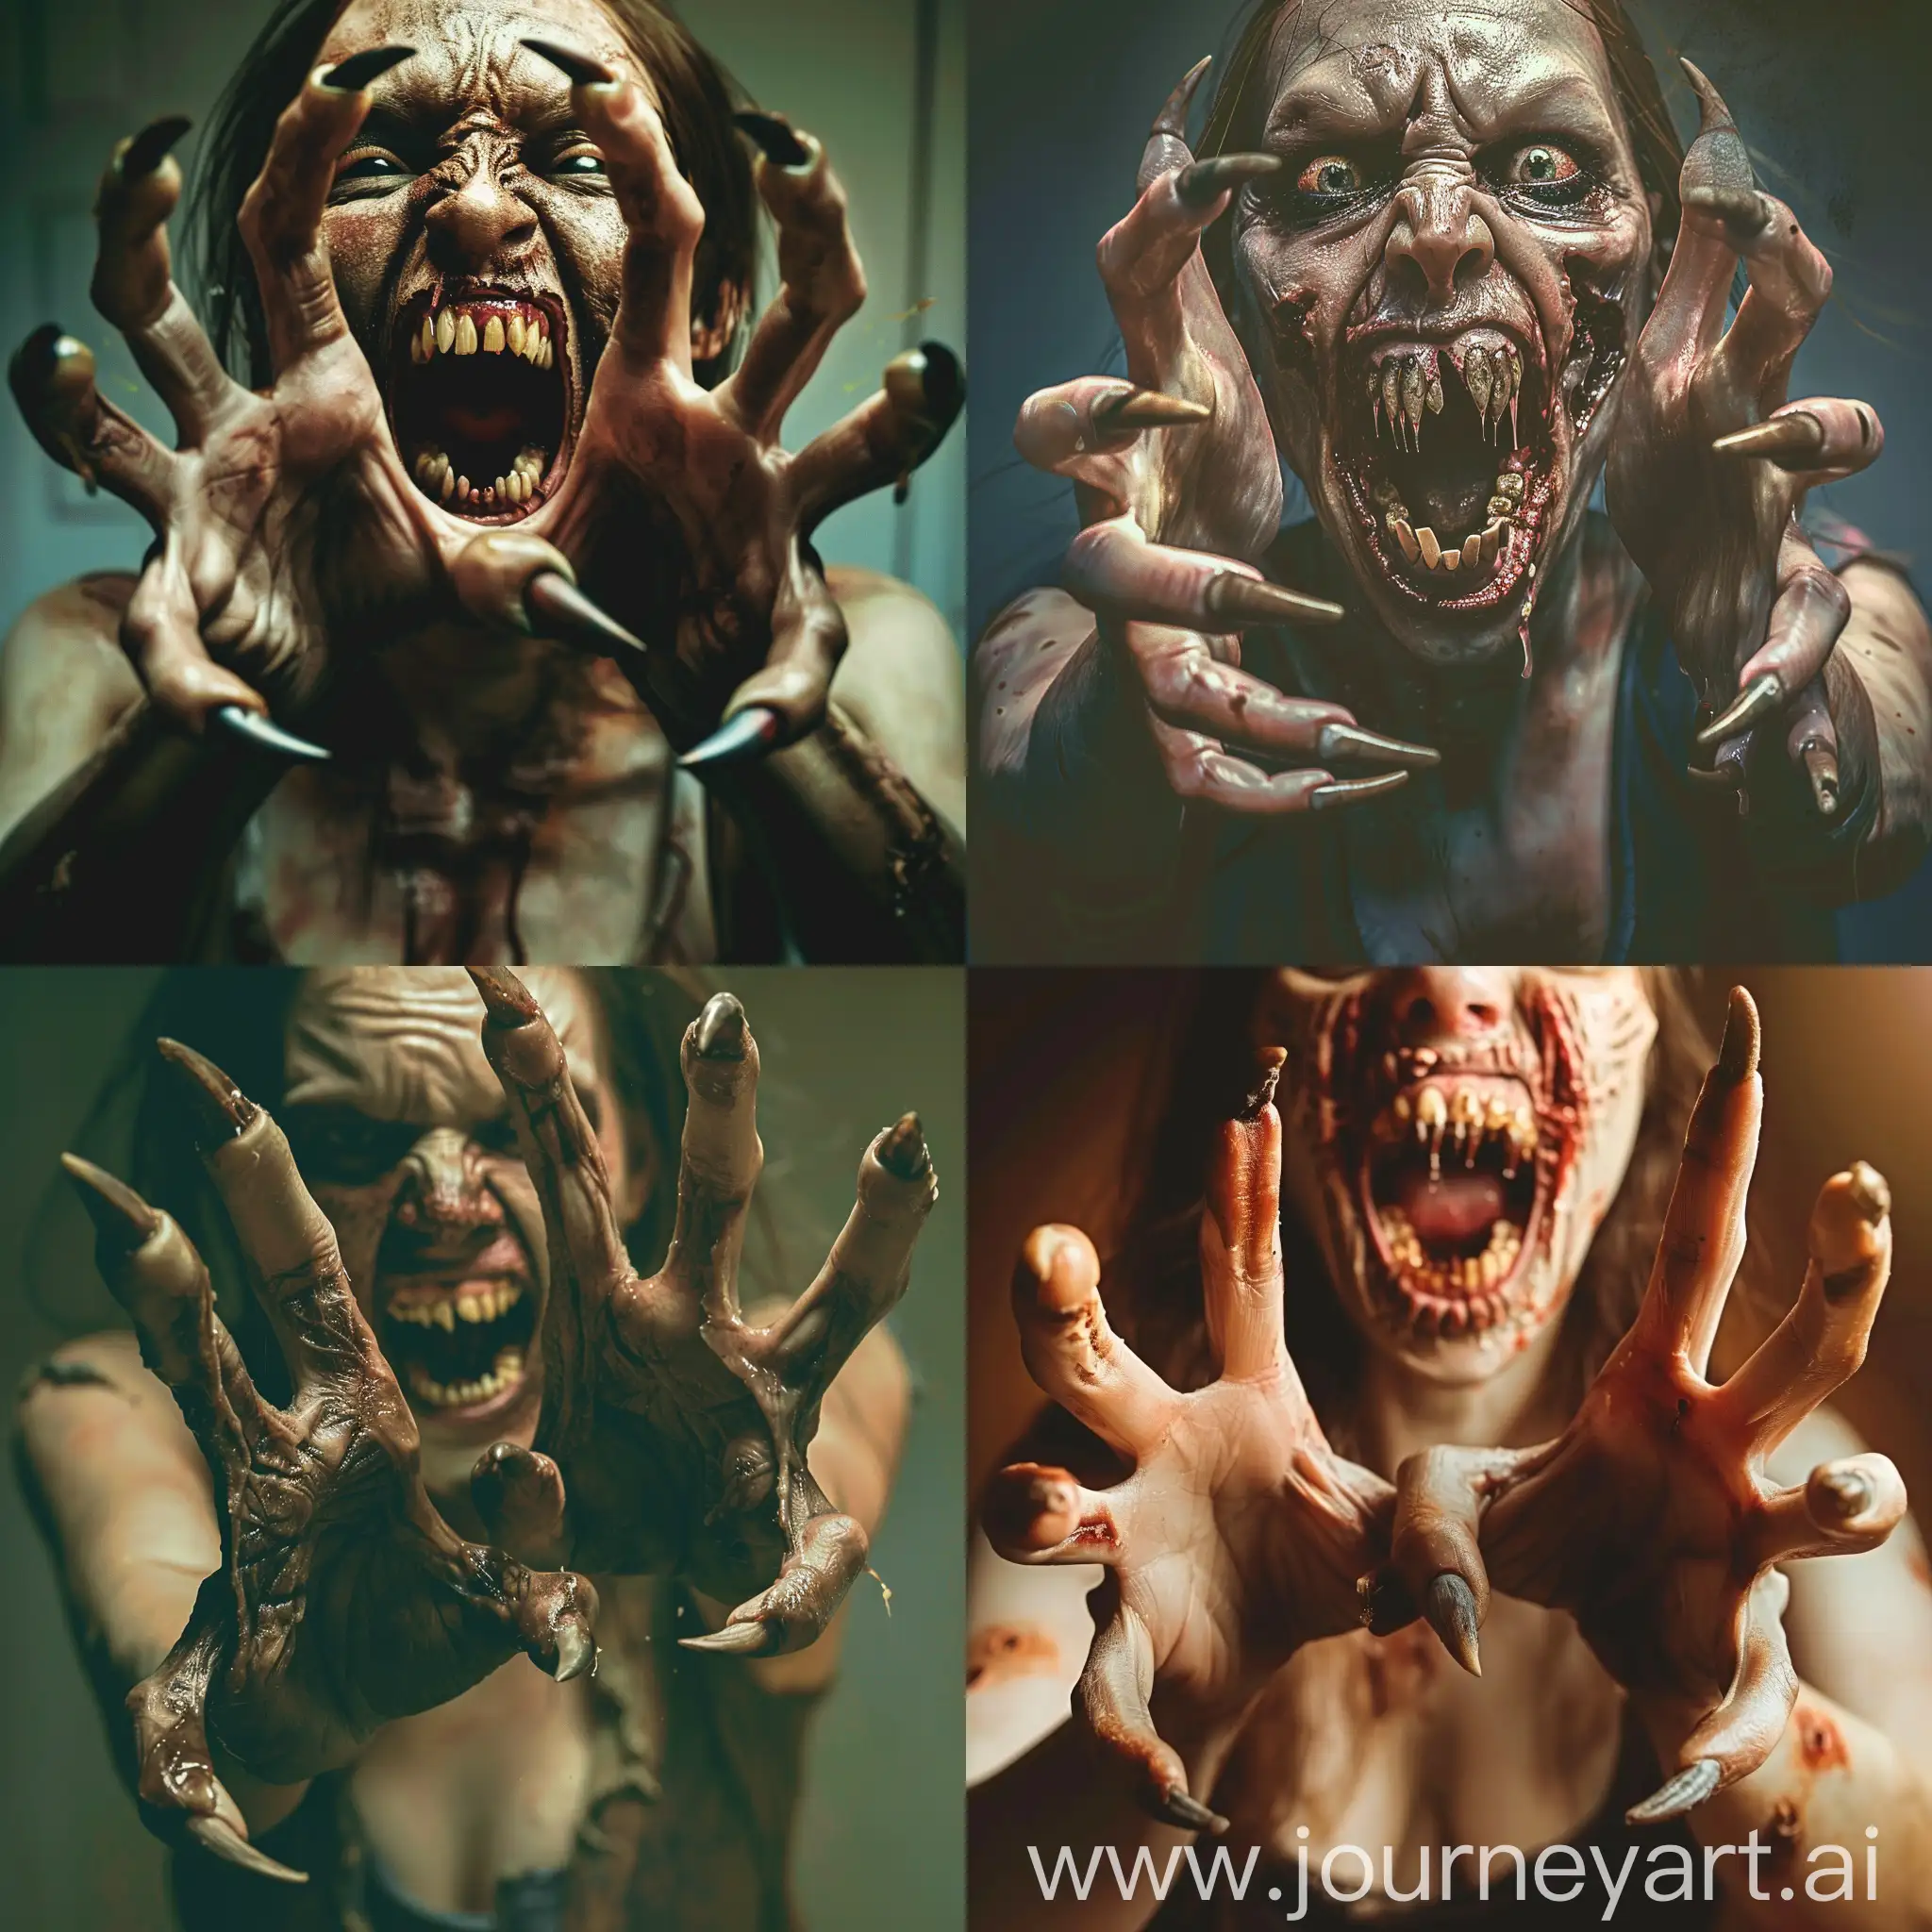 Menacing-Zombie-Woman-with-Terrifying-Claws-Horror-Art-in-32K-UHD